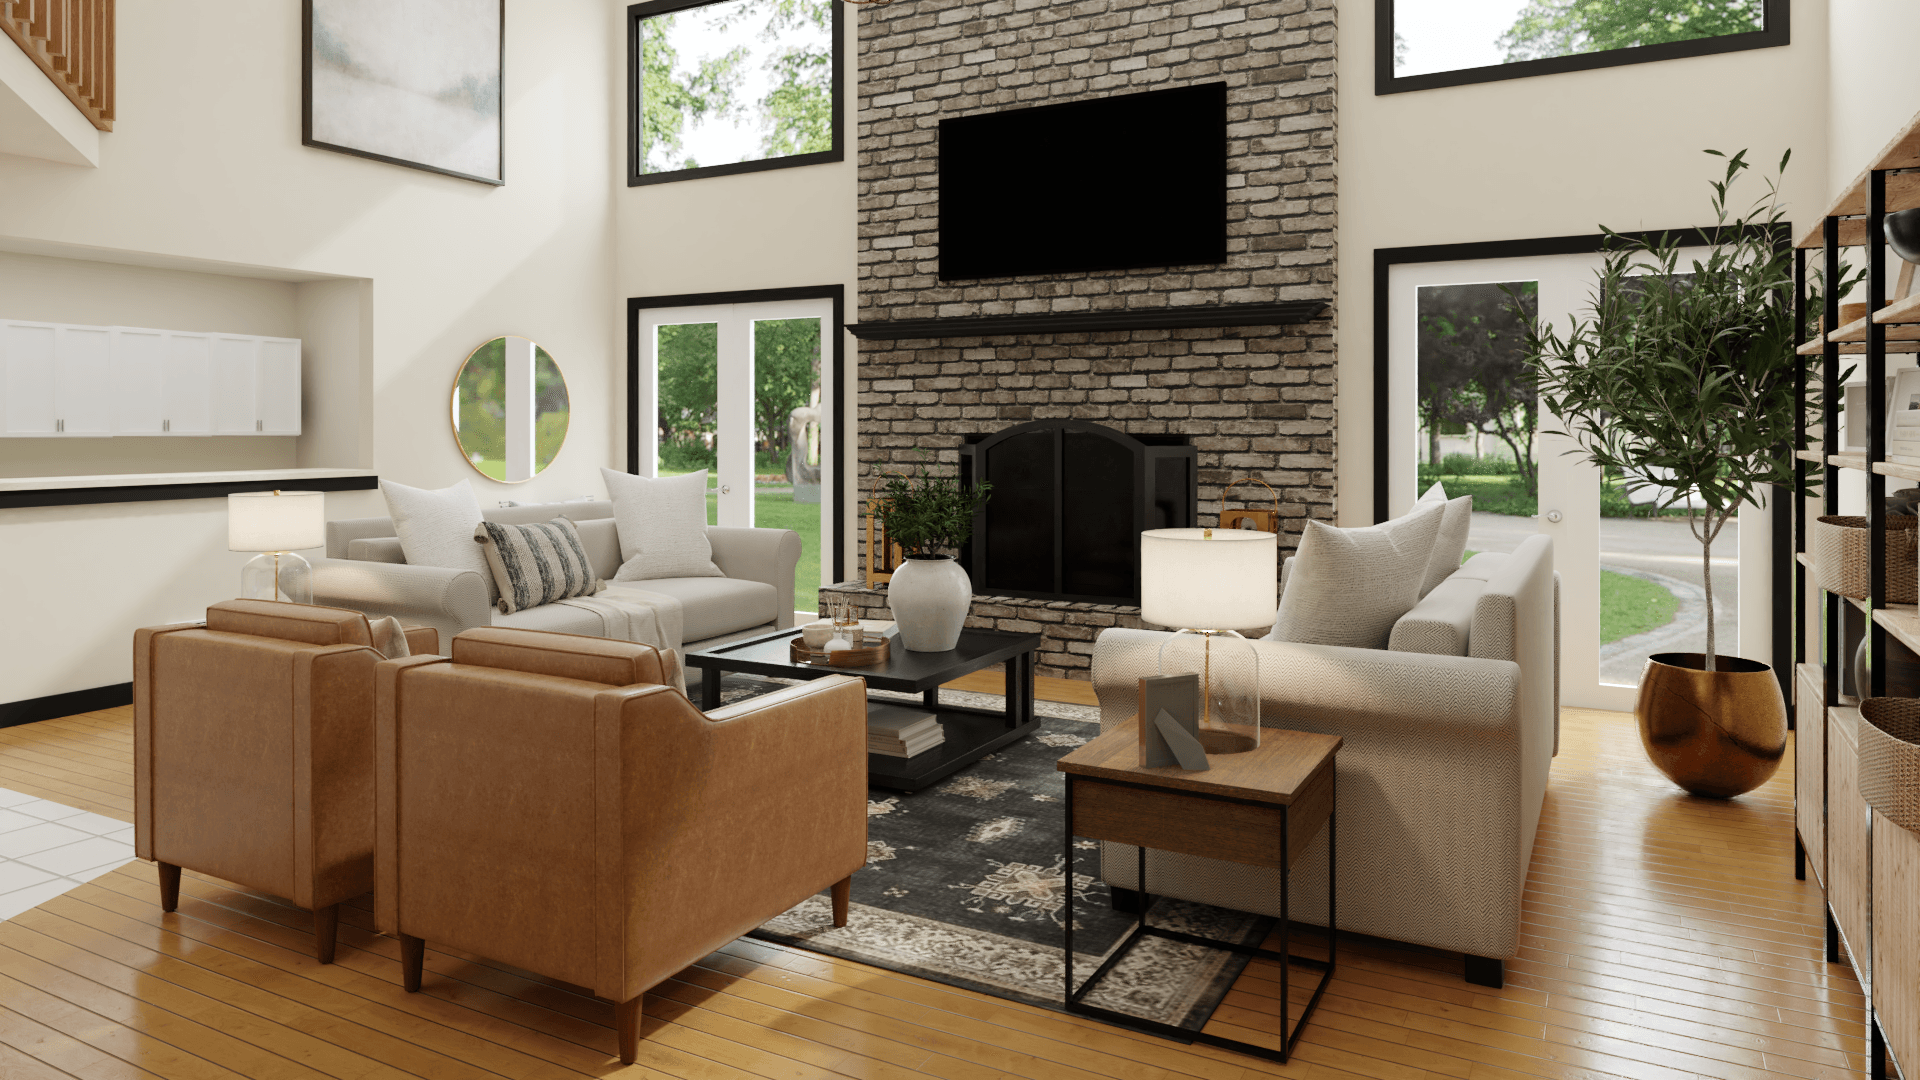 Brickwall Fireplace: A Rustic Living Room